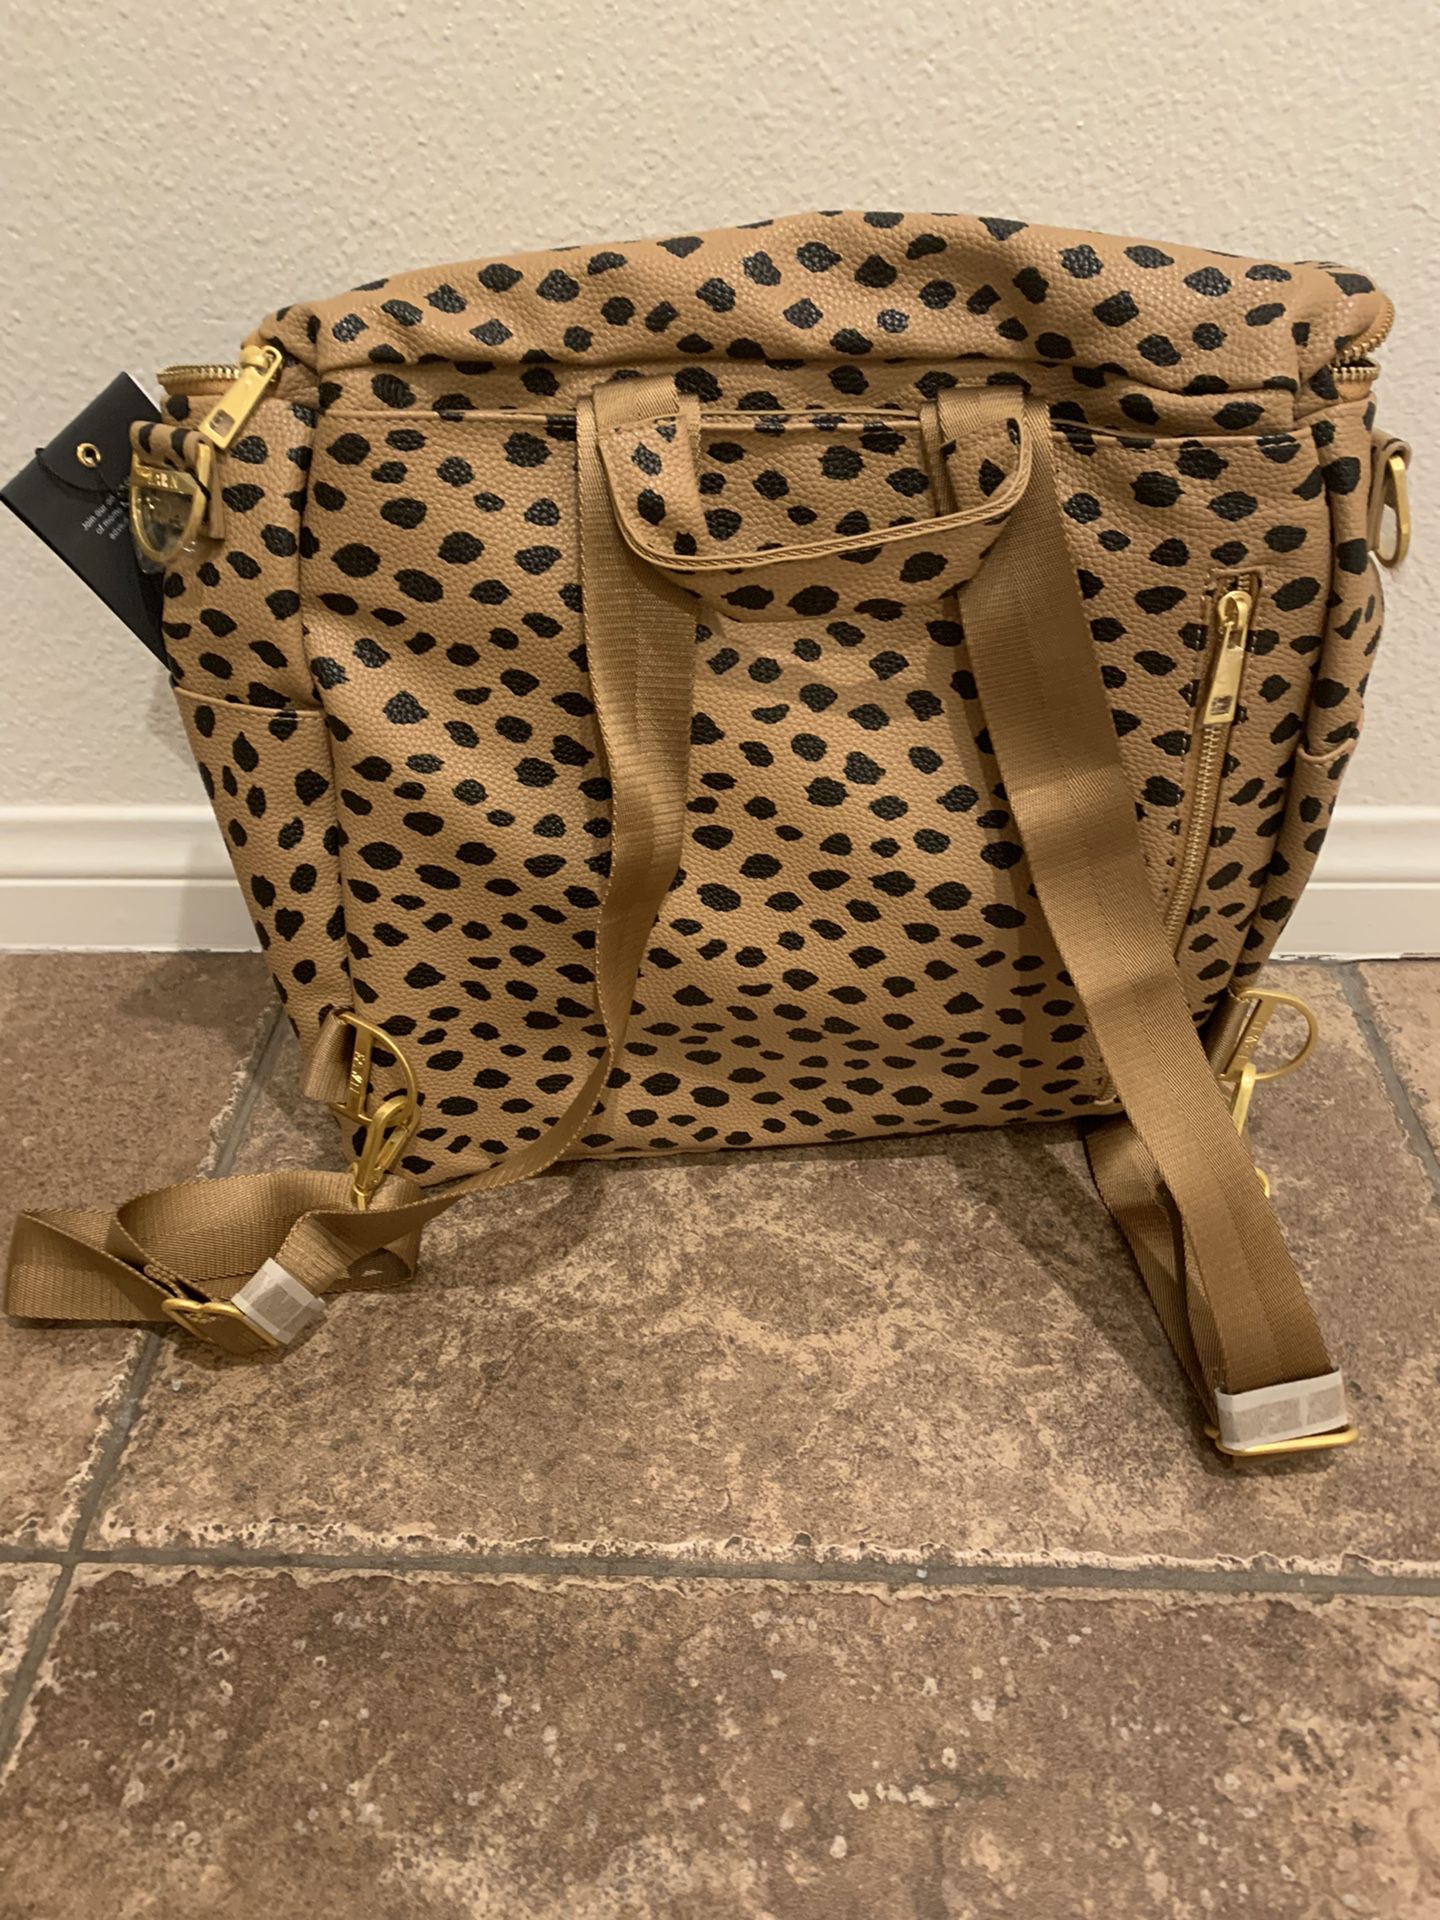 Fawn Design Original Diaper Bag With Tons Of Accessories for Sale in  Claremont, CA - OfferUp